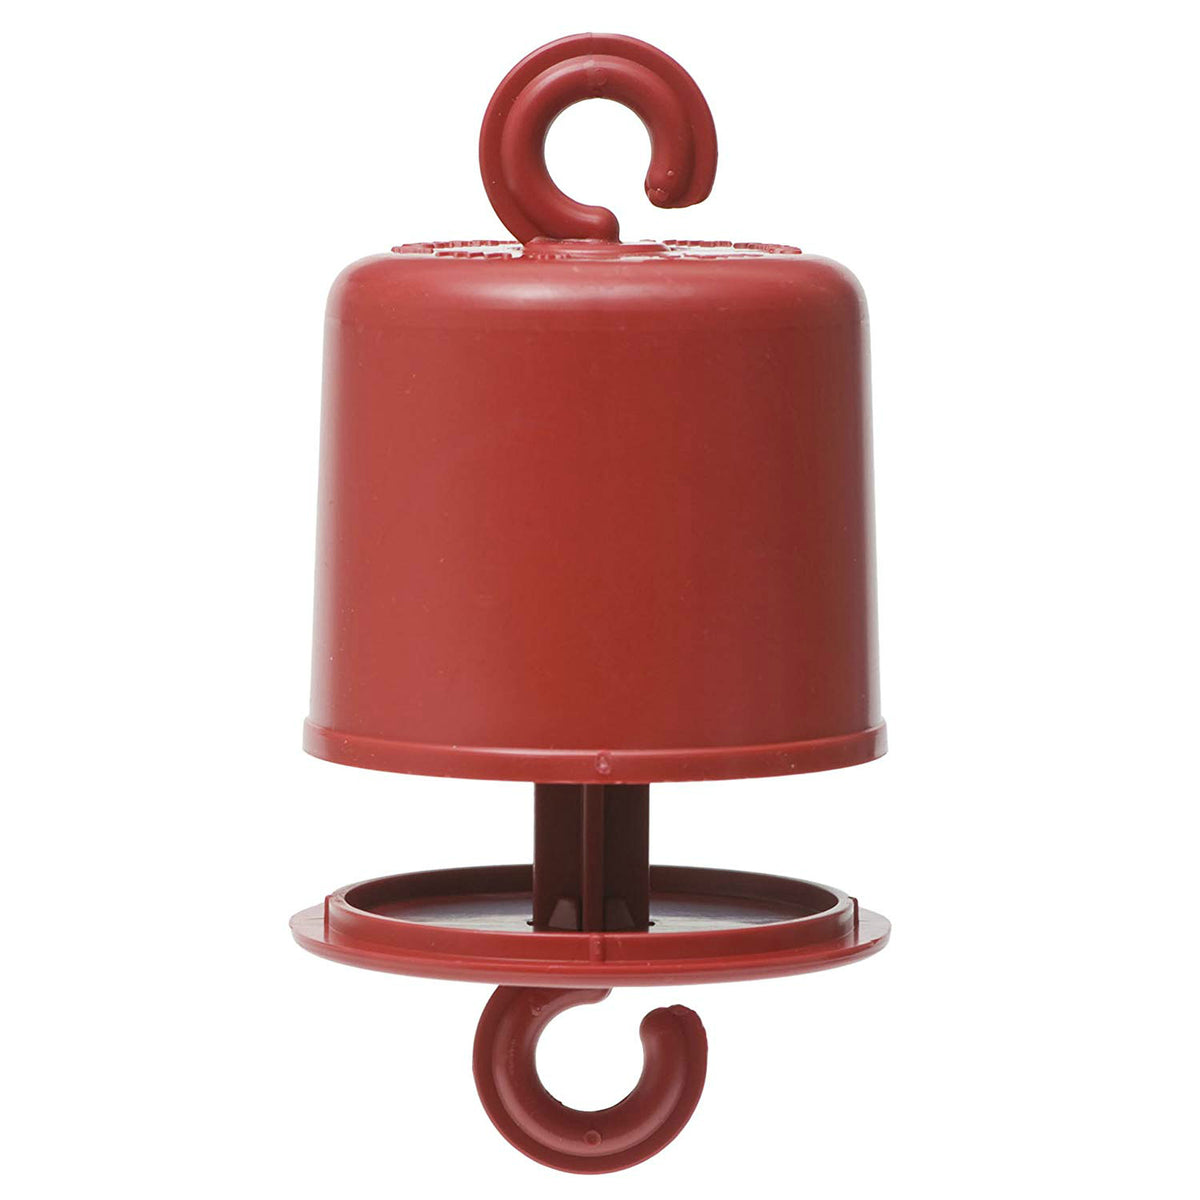 Perky Pet 245L Ant Guard For Hummingbird Feeder, Red